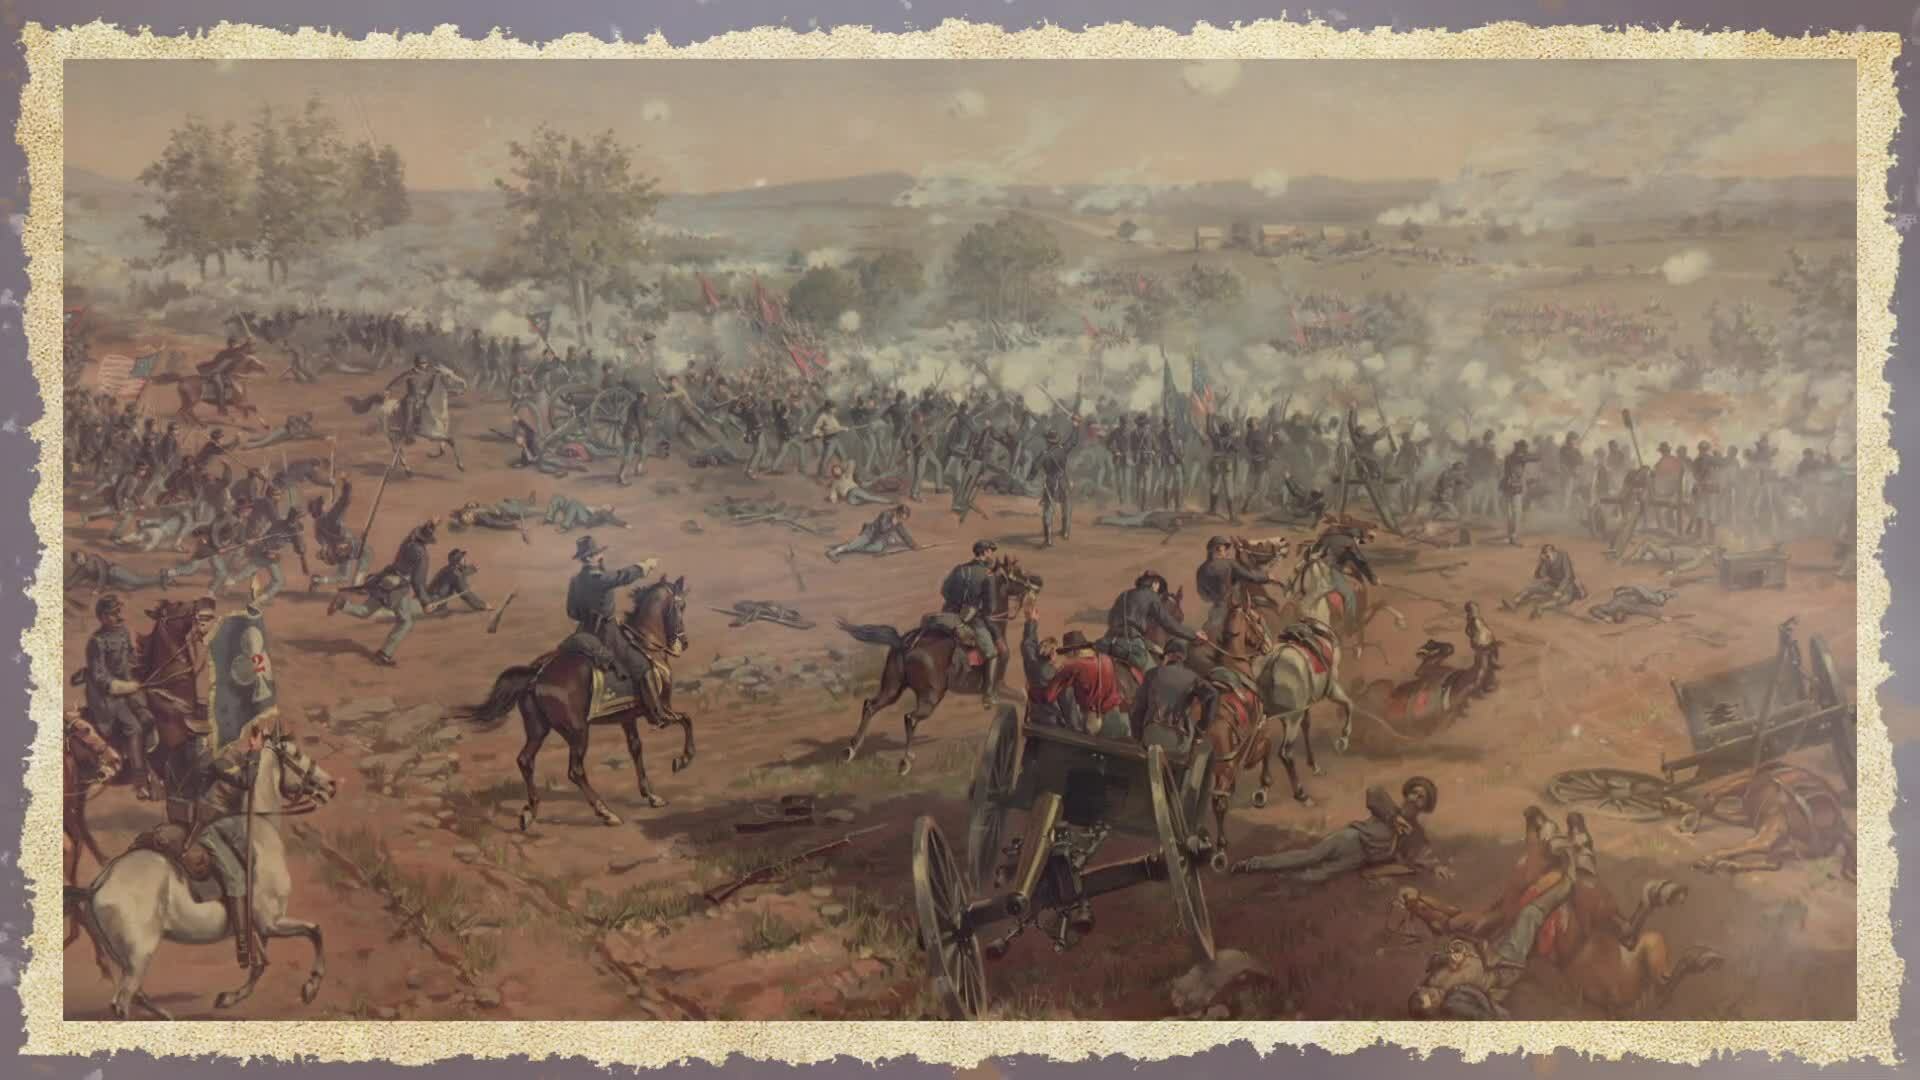 The Civil War: Events and Effects